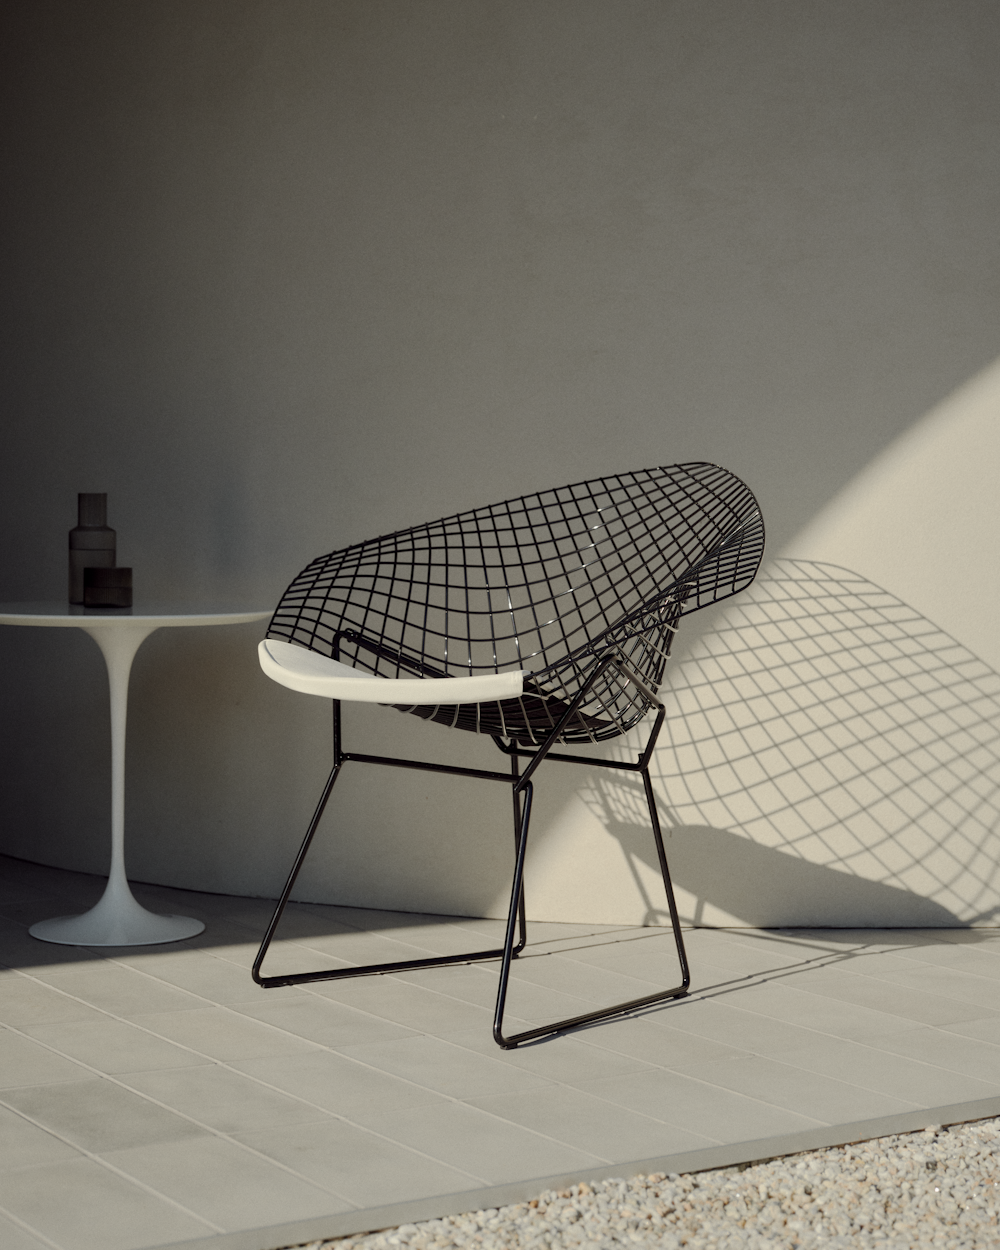 Bertoia Diamond Outdoor Lounge Chair in black and white